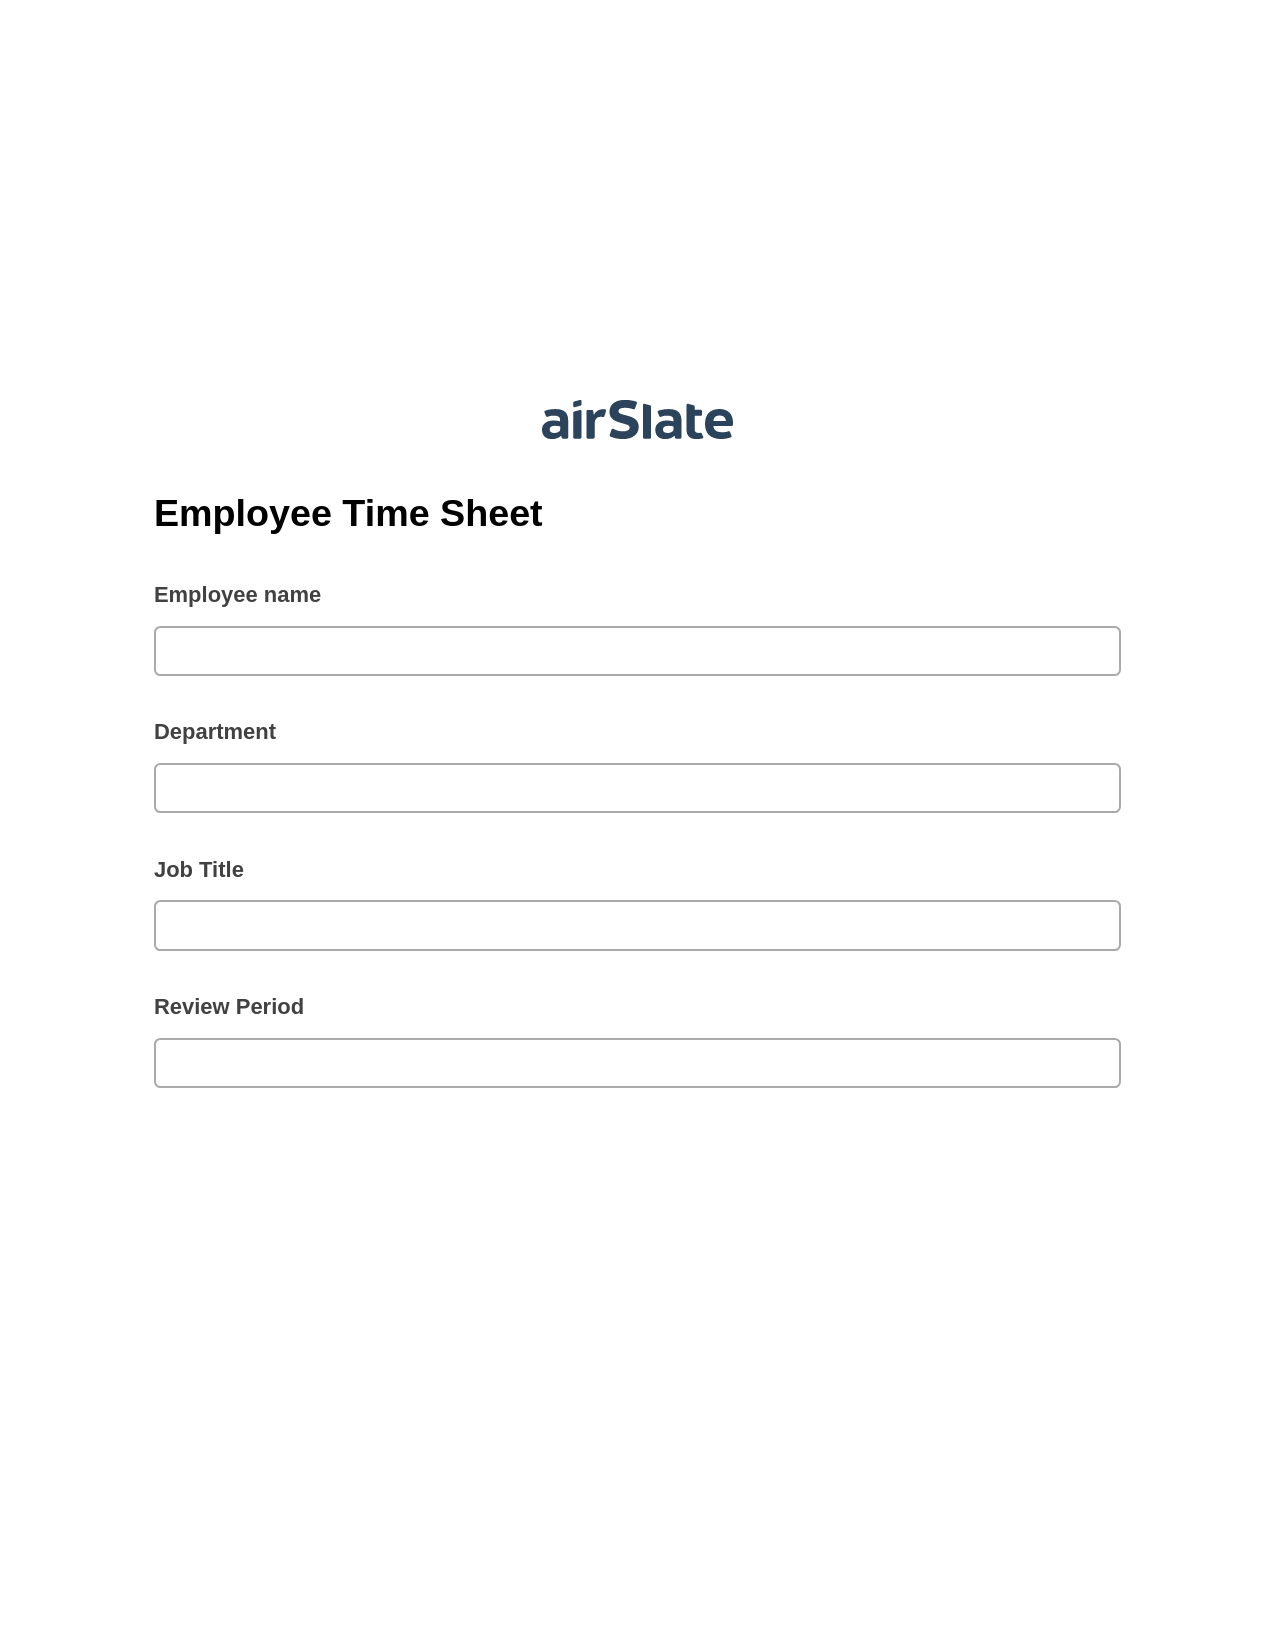 Employee Time Sheet Pre-fill from Litmos bot, Create Salesforce Records Bot, Export to Smartsheet